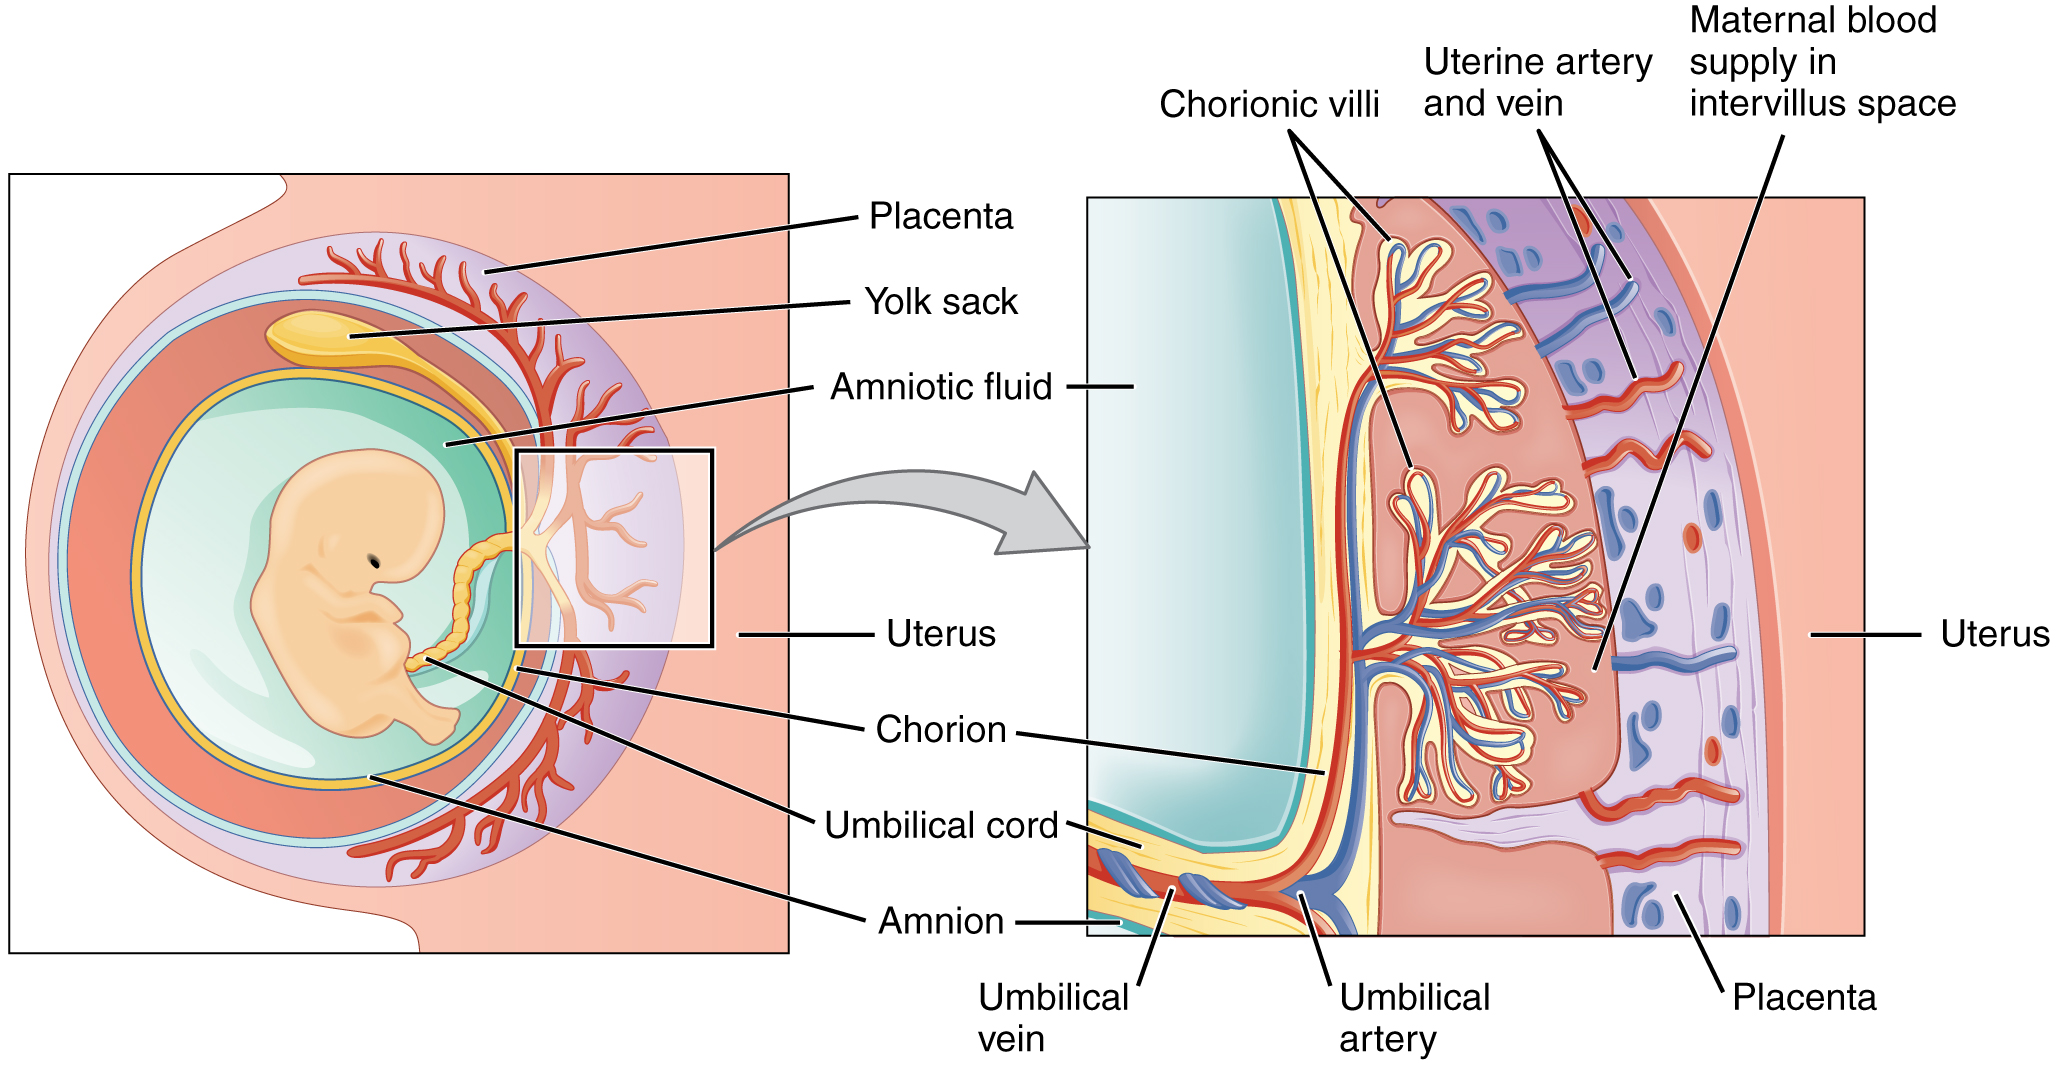 Embryo attached to the placenta in the amniotic cavity.